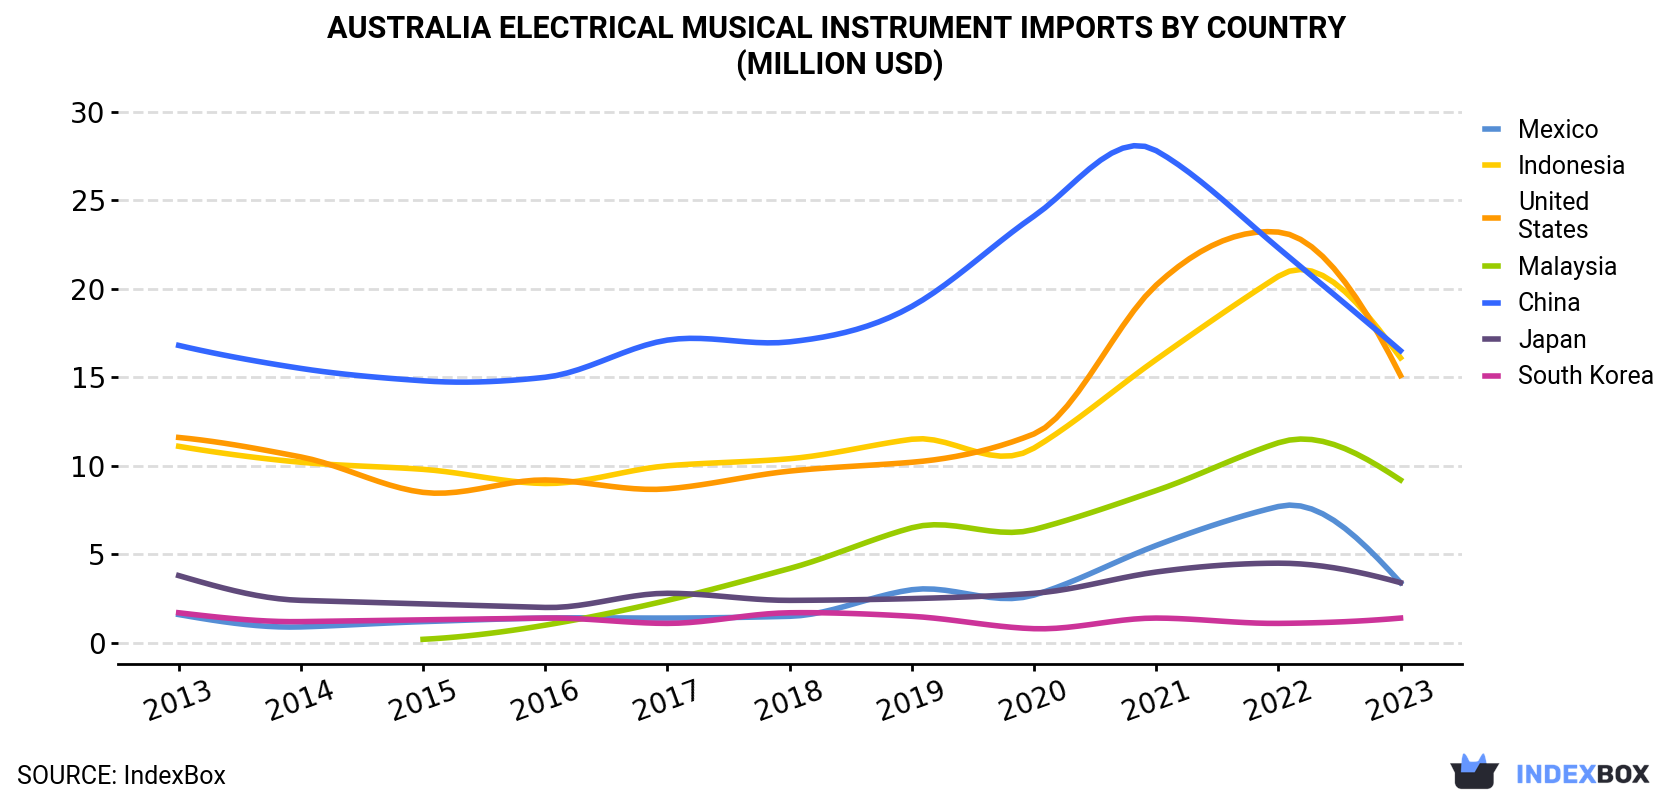 Australia Electrical Musical Instrument Imports By Country (Million USD)